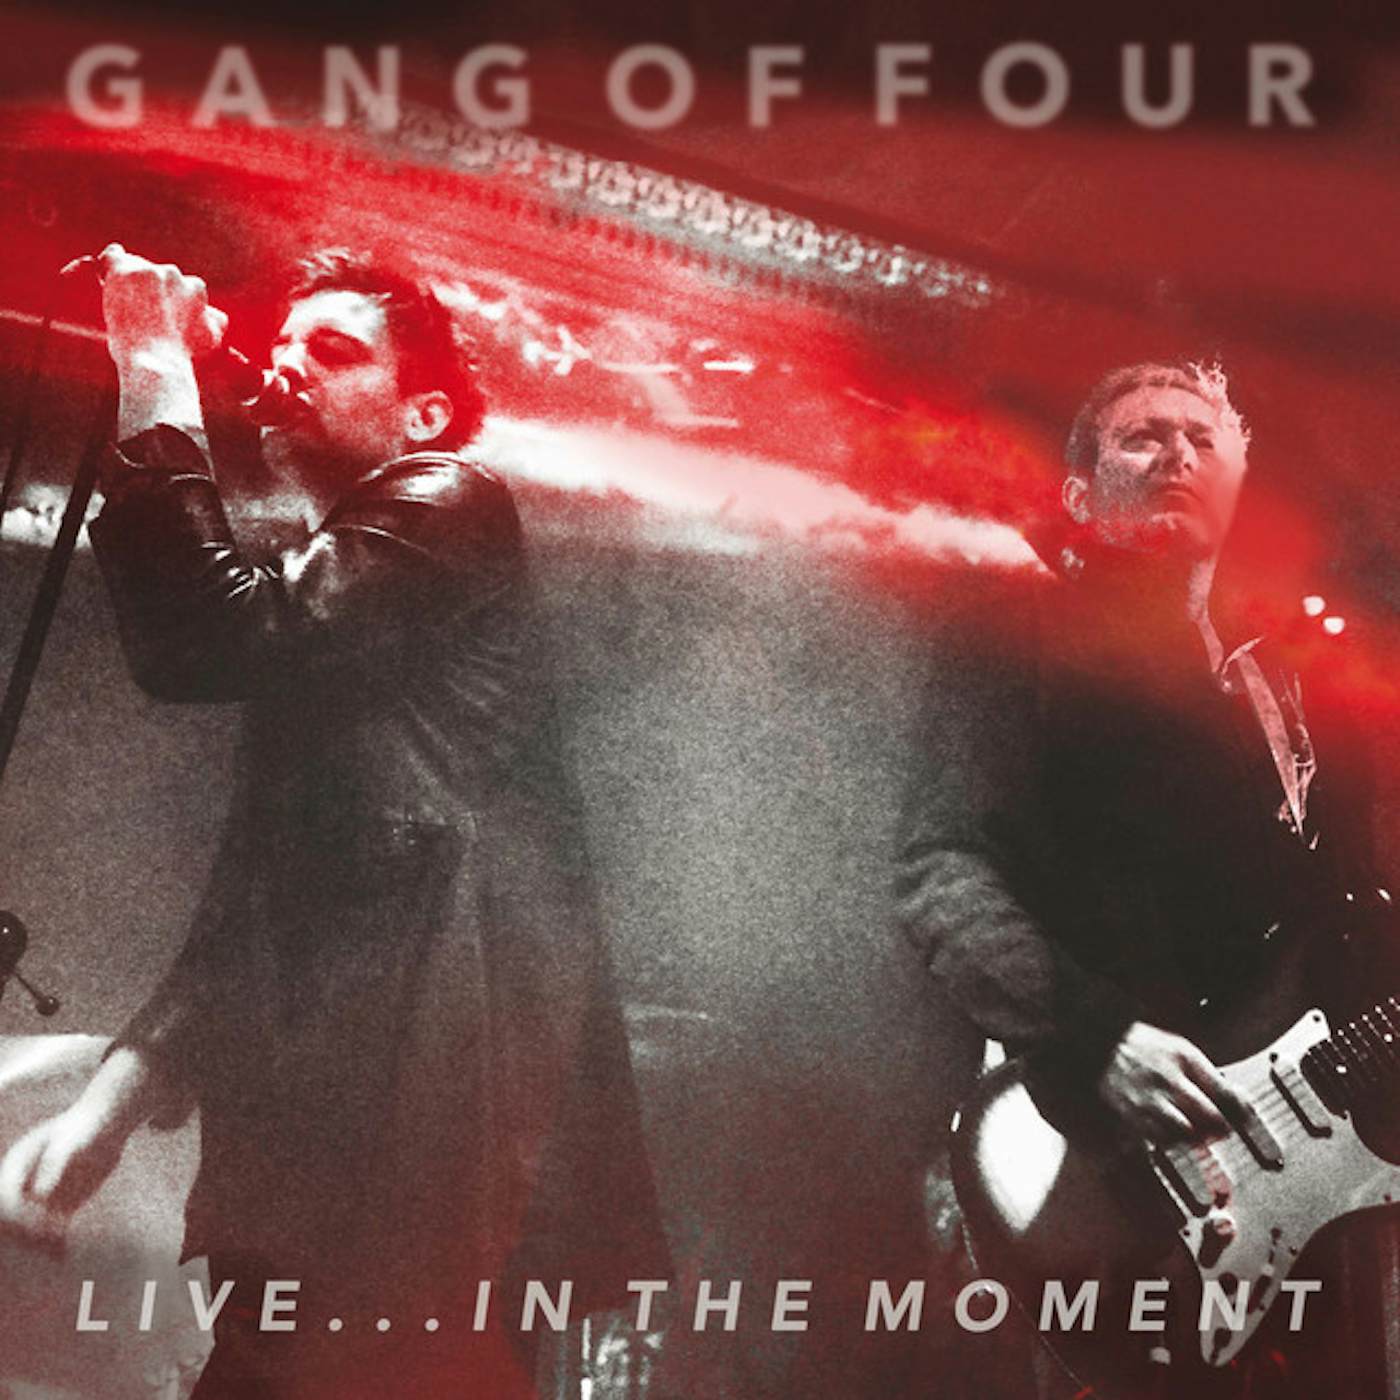 Gang Of Four LIVE IN THE MOMENT Vinyl Record